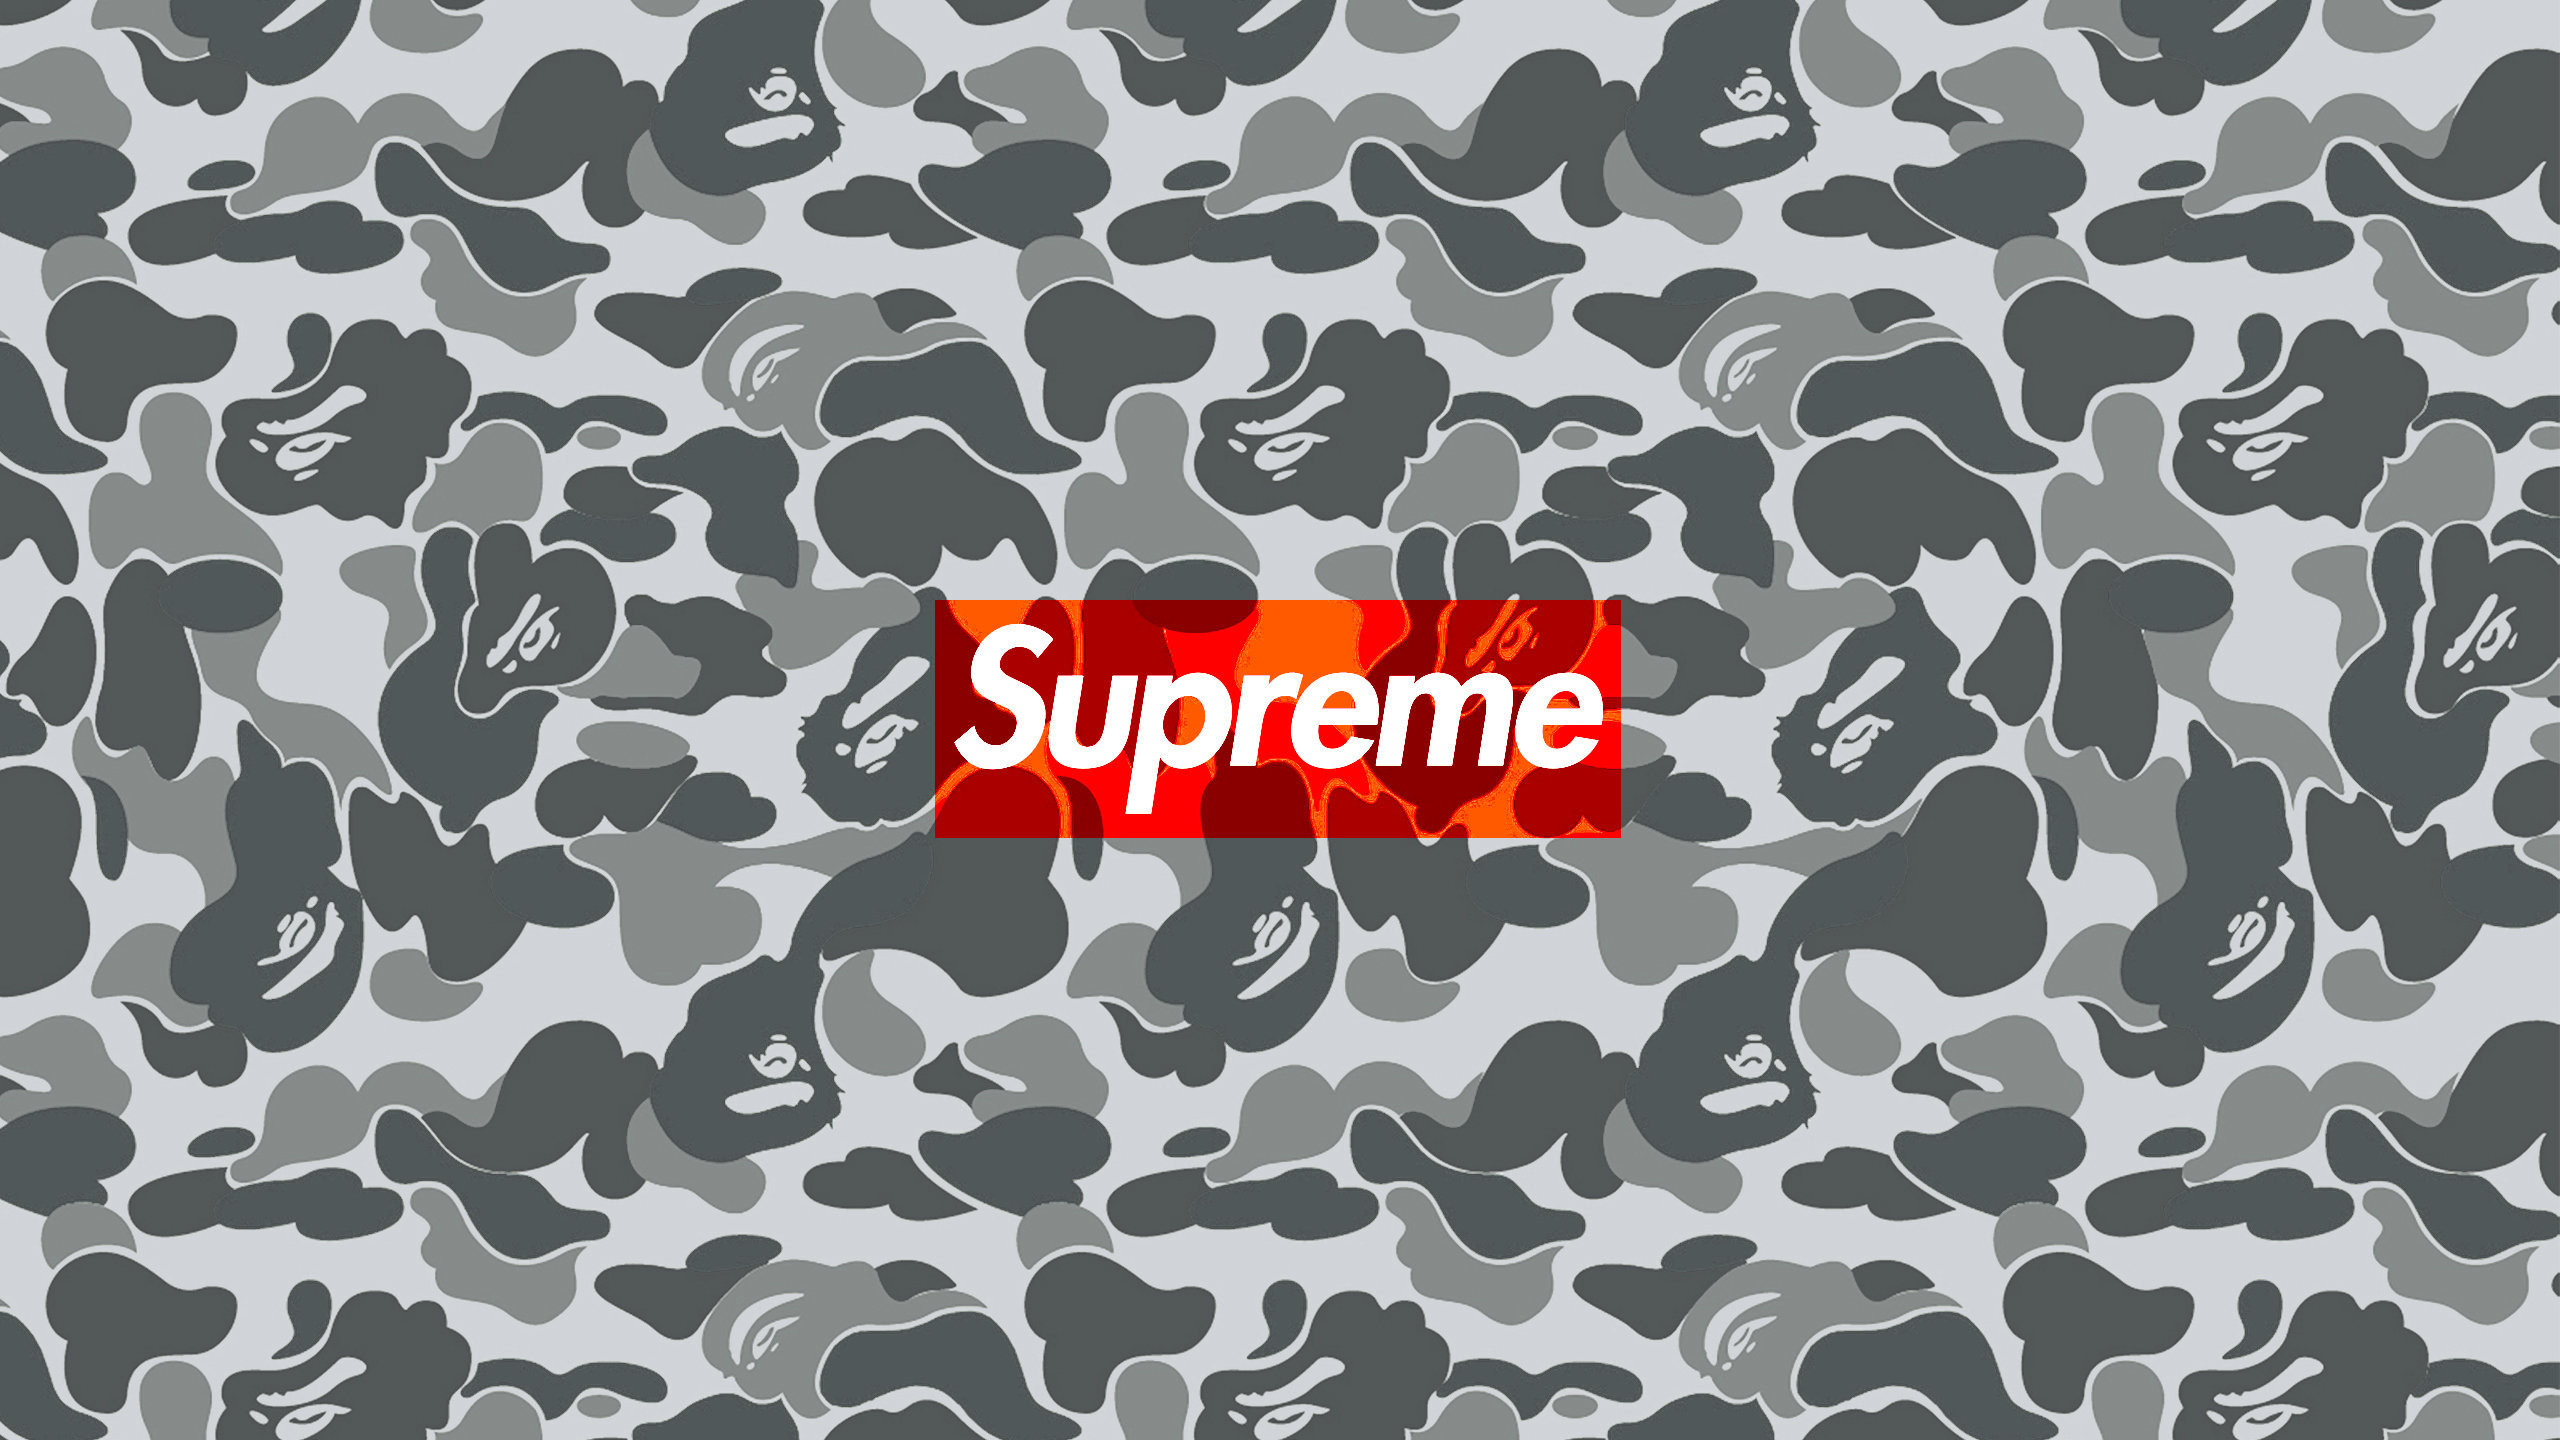 2560x1440 Download the Supreme Bape Camo wallpaper below for your mobile device  (Android phones, iPhone etc.)